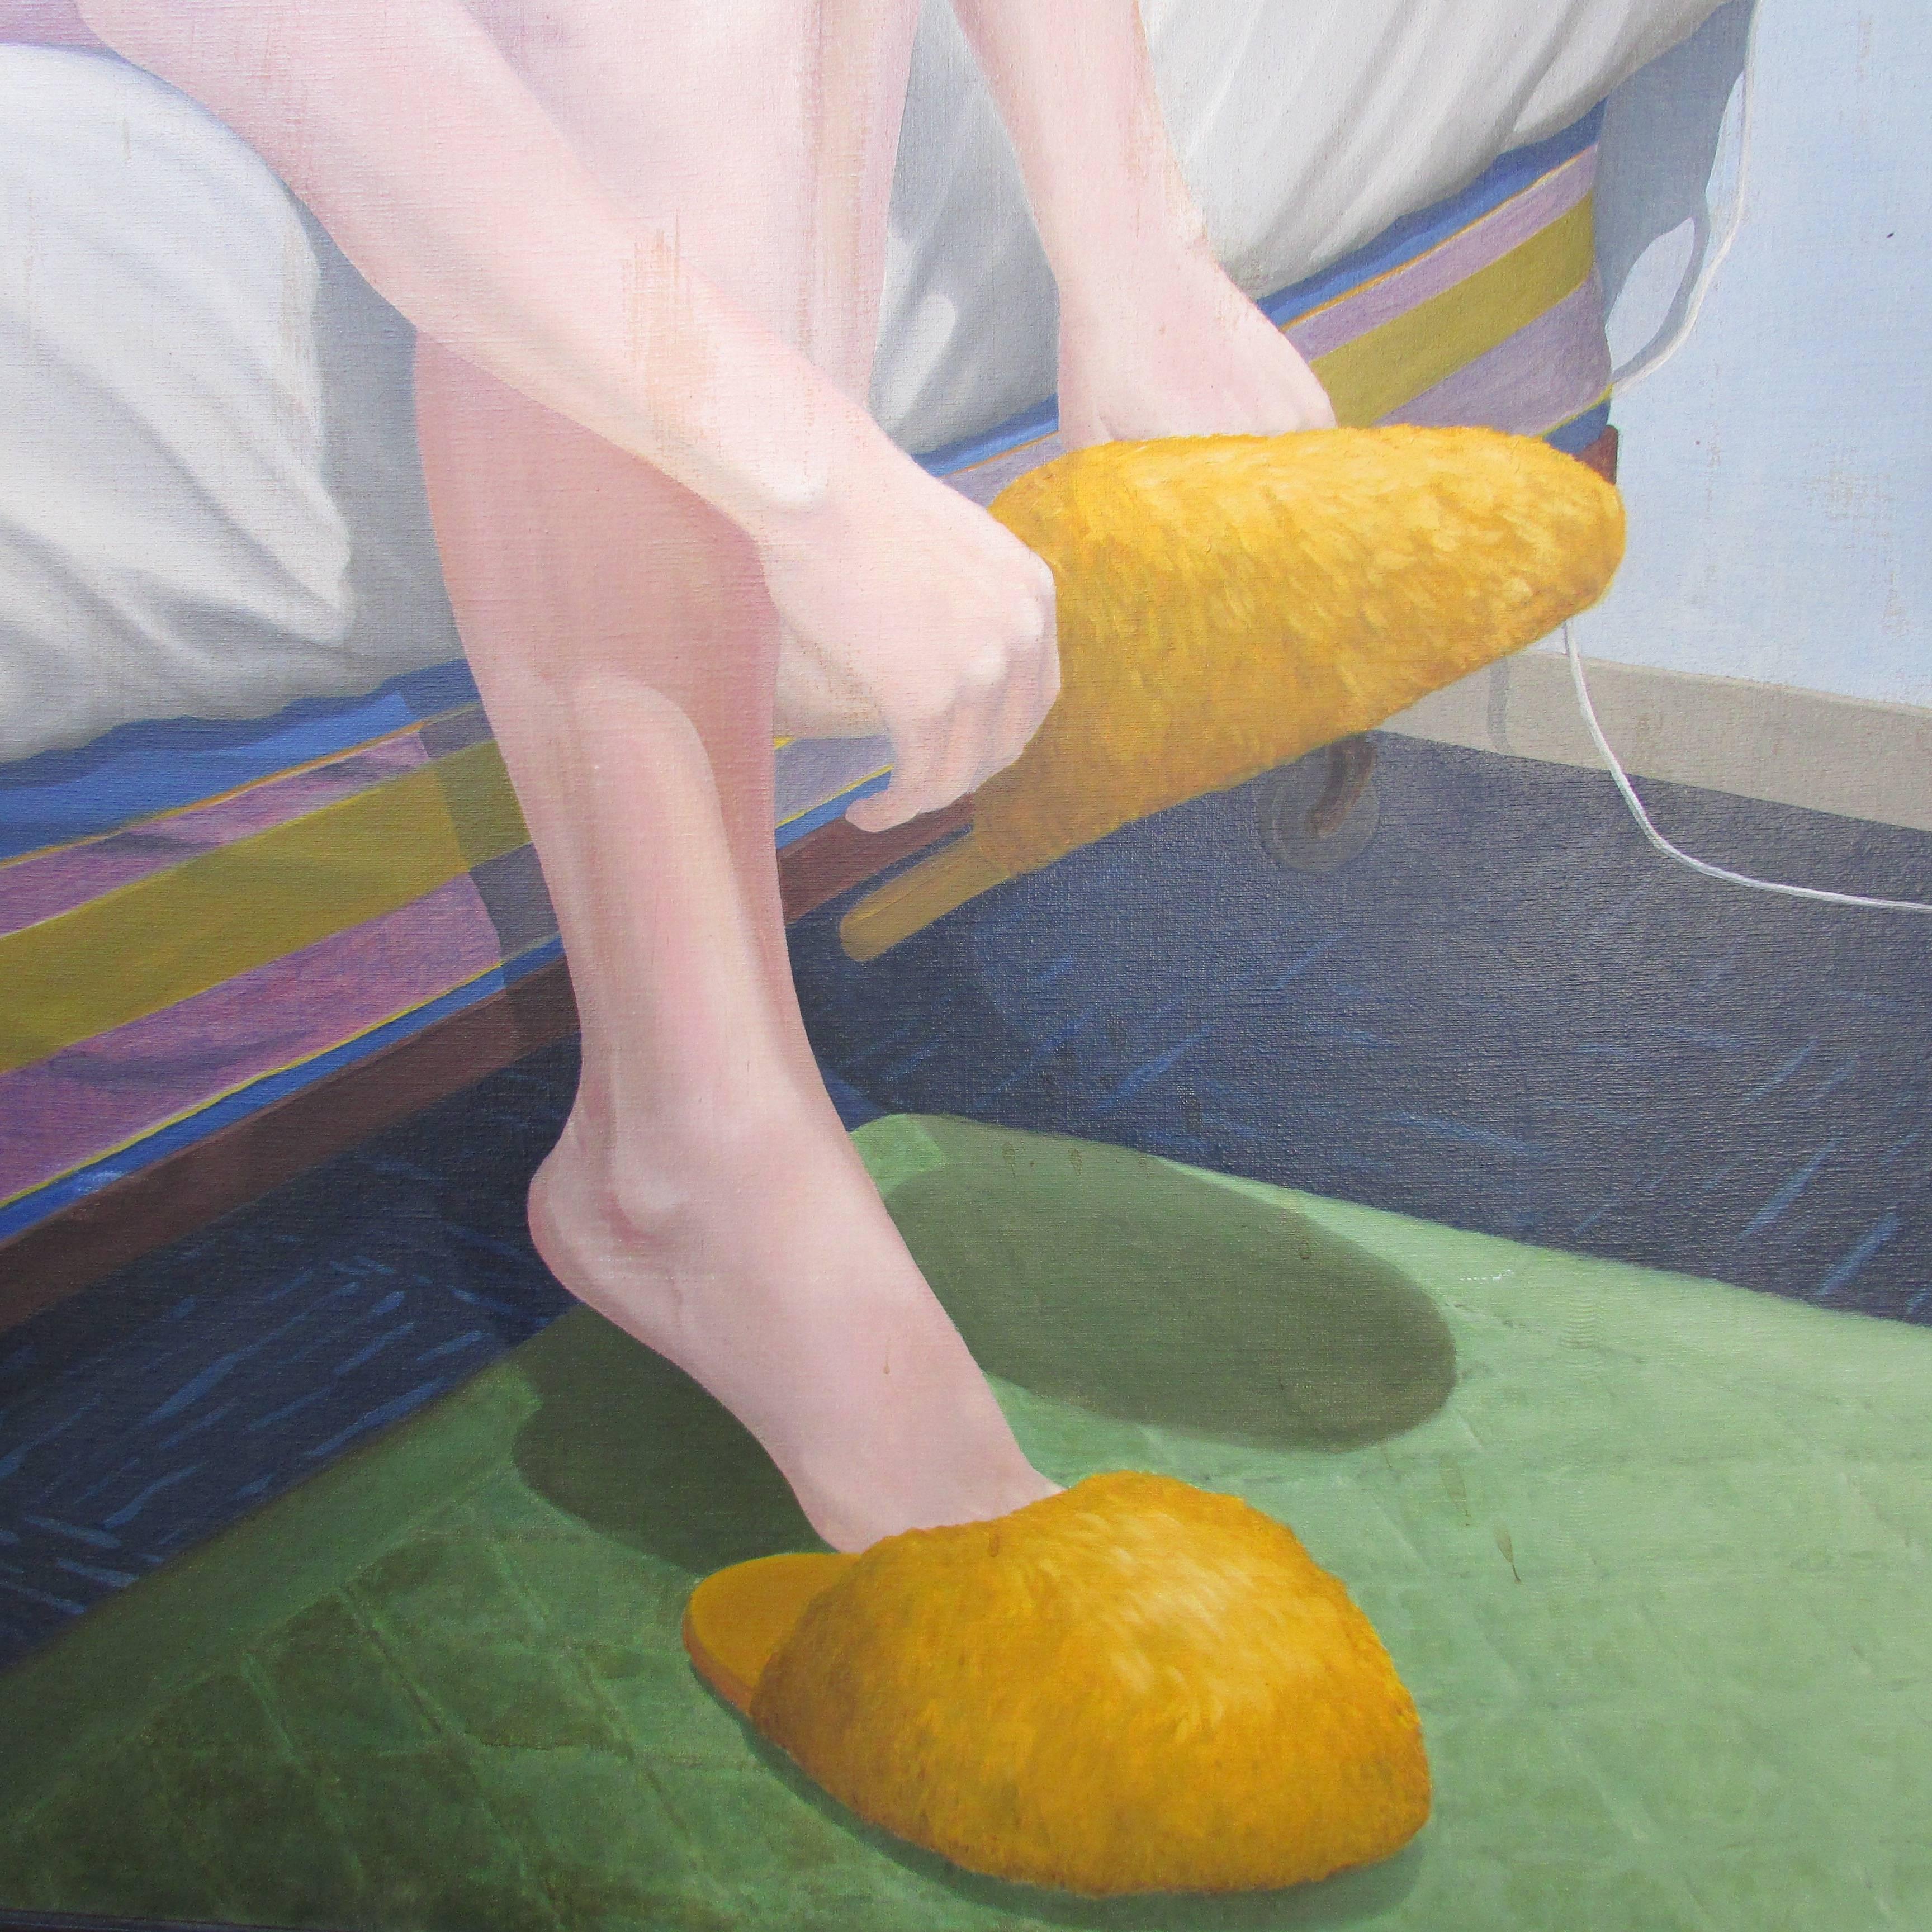 This is a Mid-Century, large-scale oil on canvas signed and dated 'Edward L. Higgins, 1967'. Titled ‘Bedroom #5', the vibrant colors and big yellow slippers make this piece appealing and relatable.